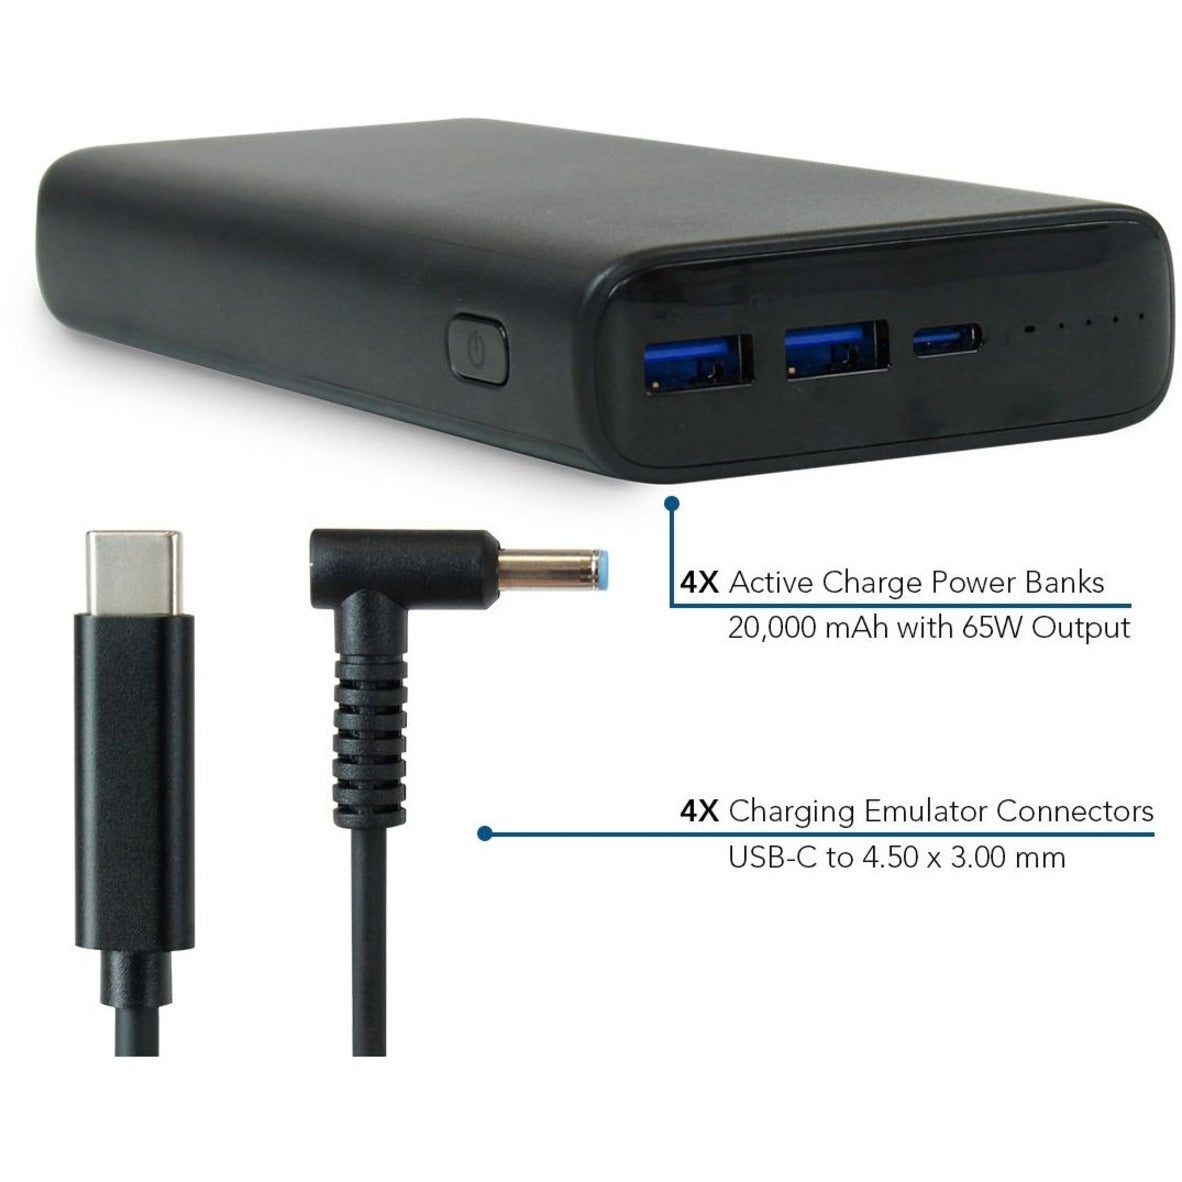 JAR Systems A4USBC2YPBC13 Adapt4 USB-C Charging Station Active Charge Upgrade with HP Connectors, Chromebooks, Notebooks, Tablets